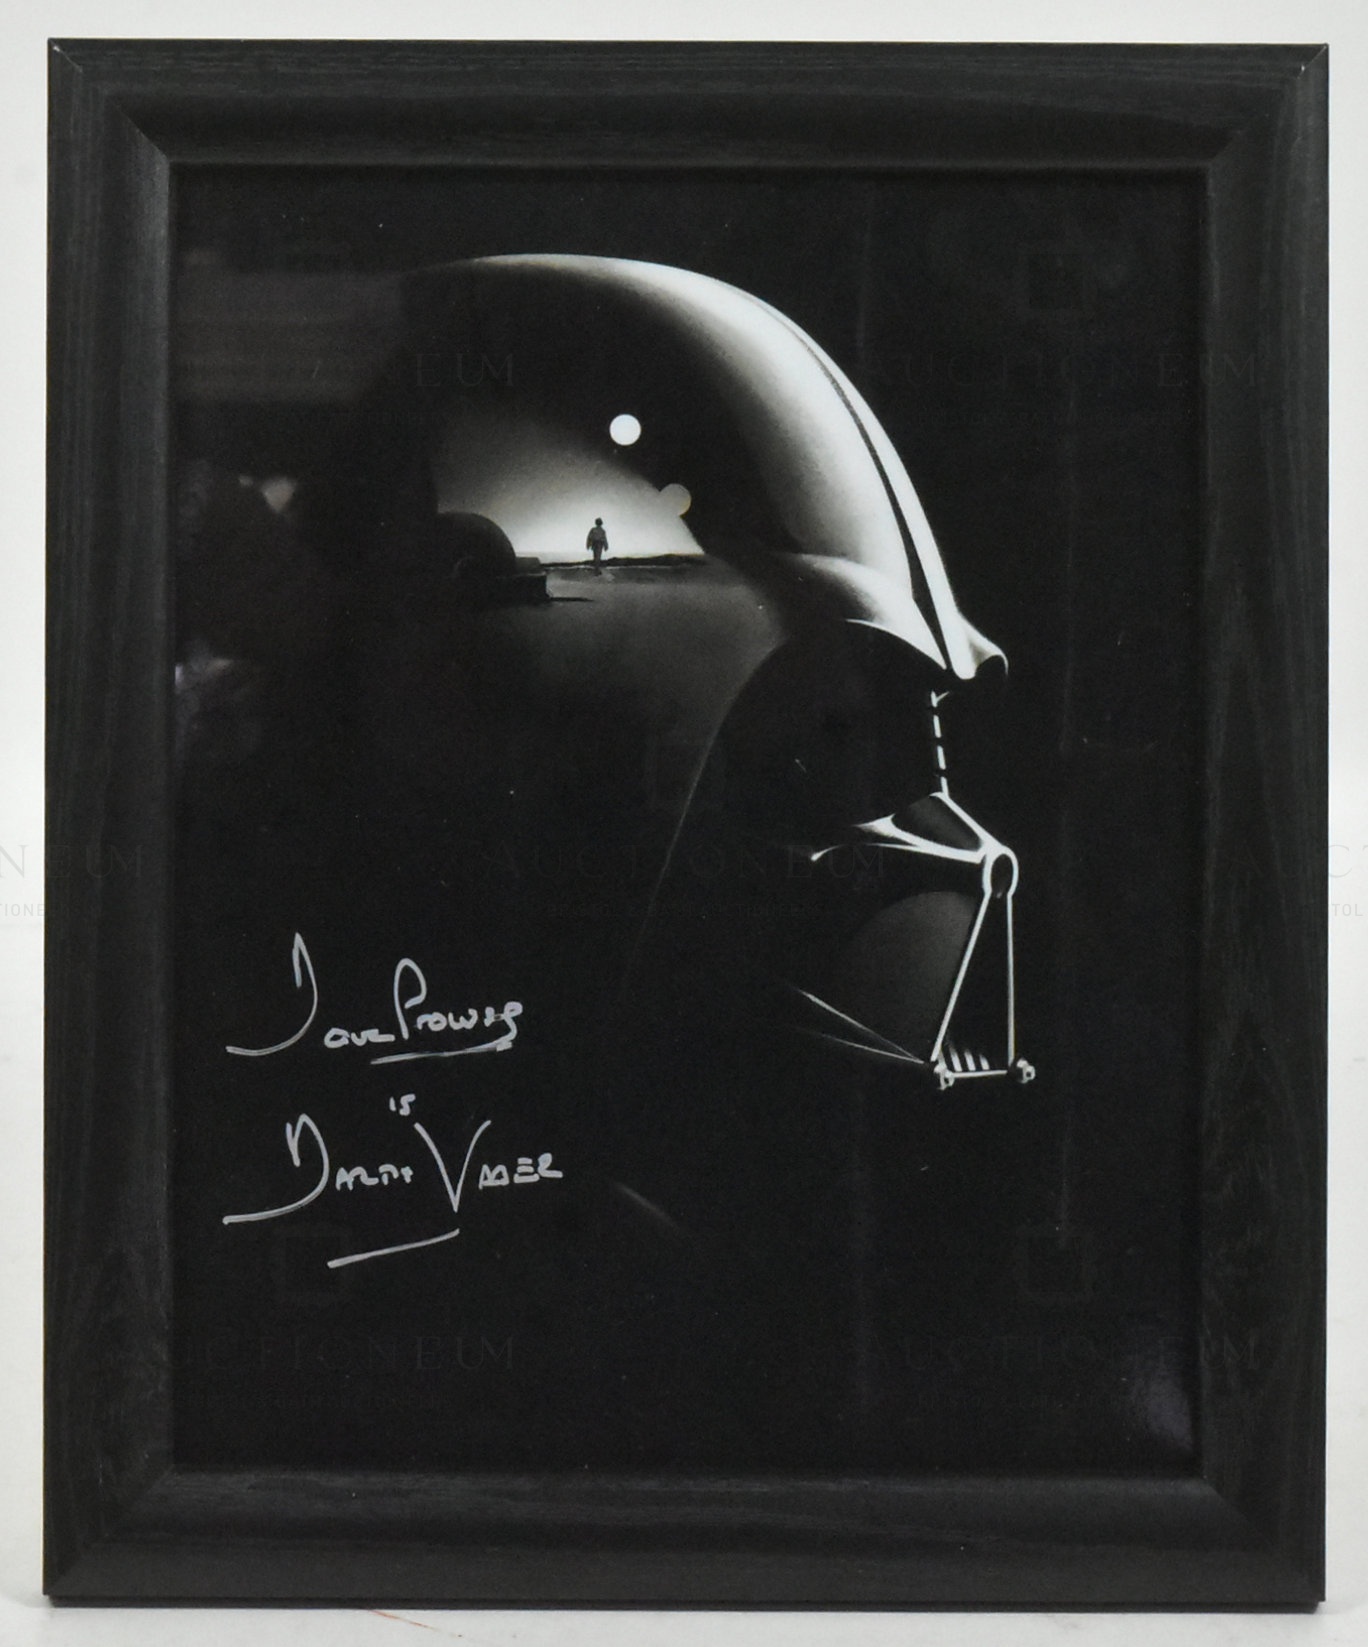 ESTATE OF DAVE PROWSE - STAR WARS - SIGNED 8X10" PHOTO - Image 3 of 3